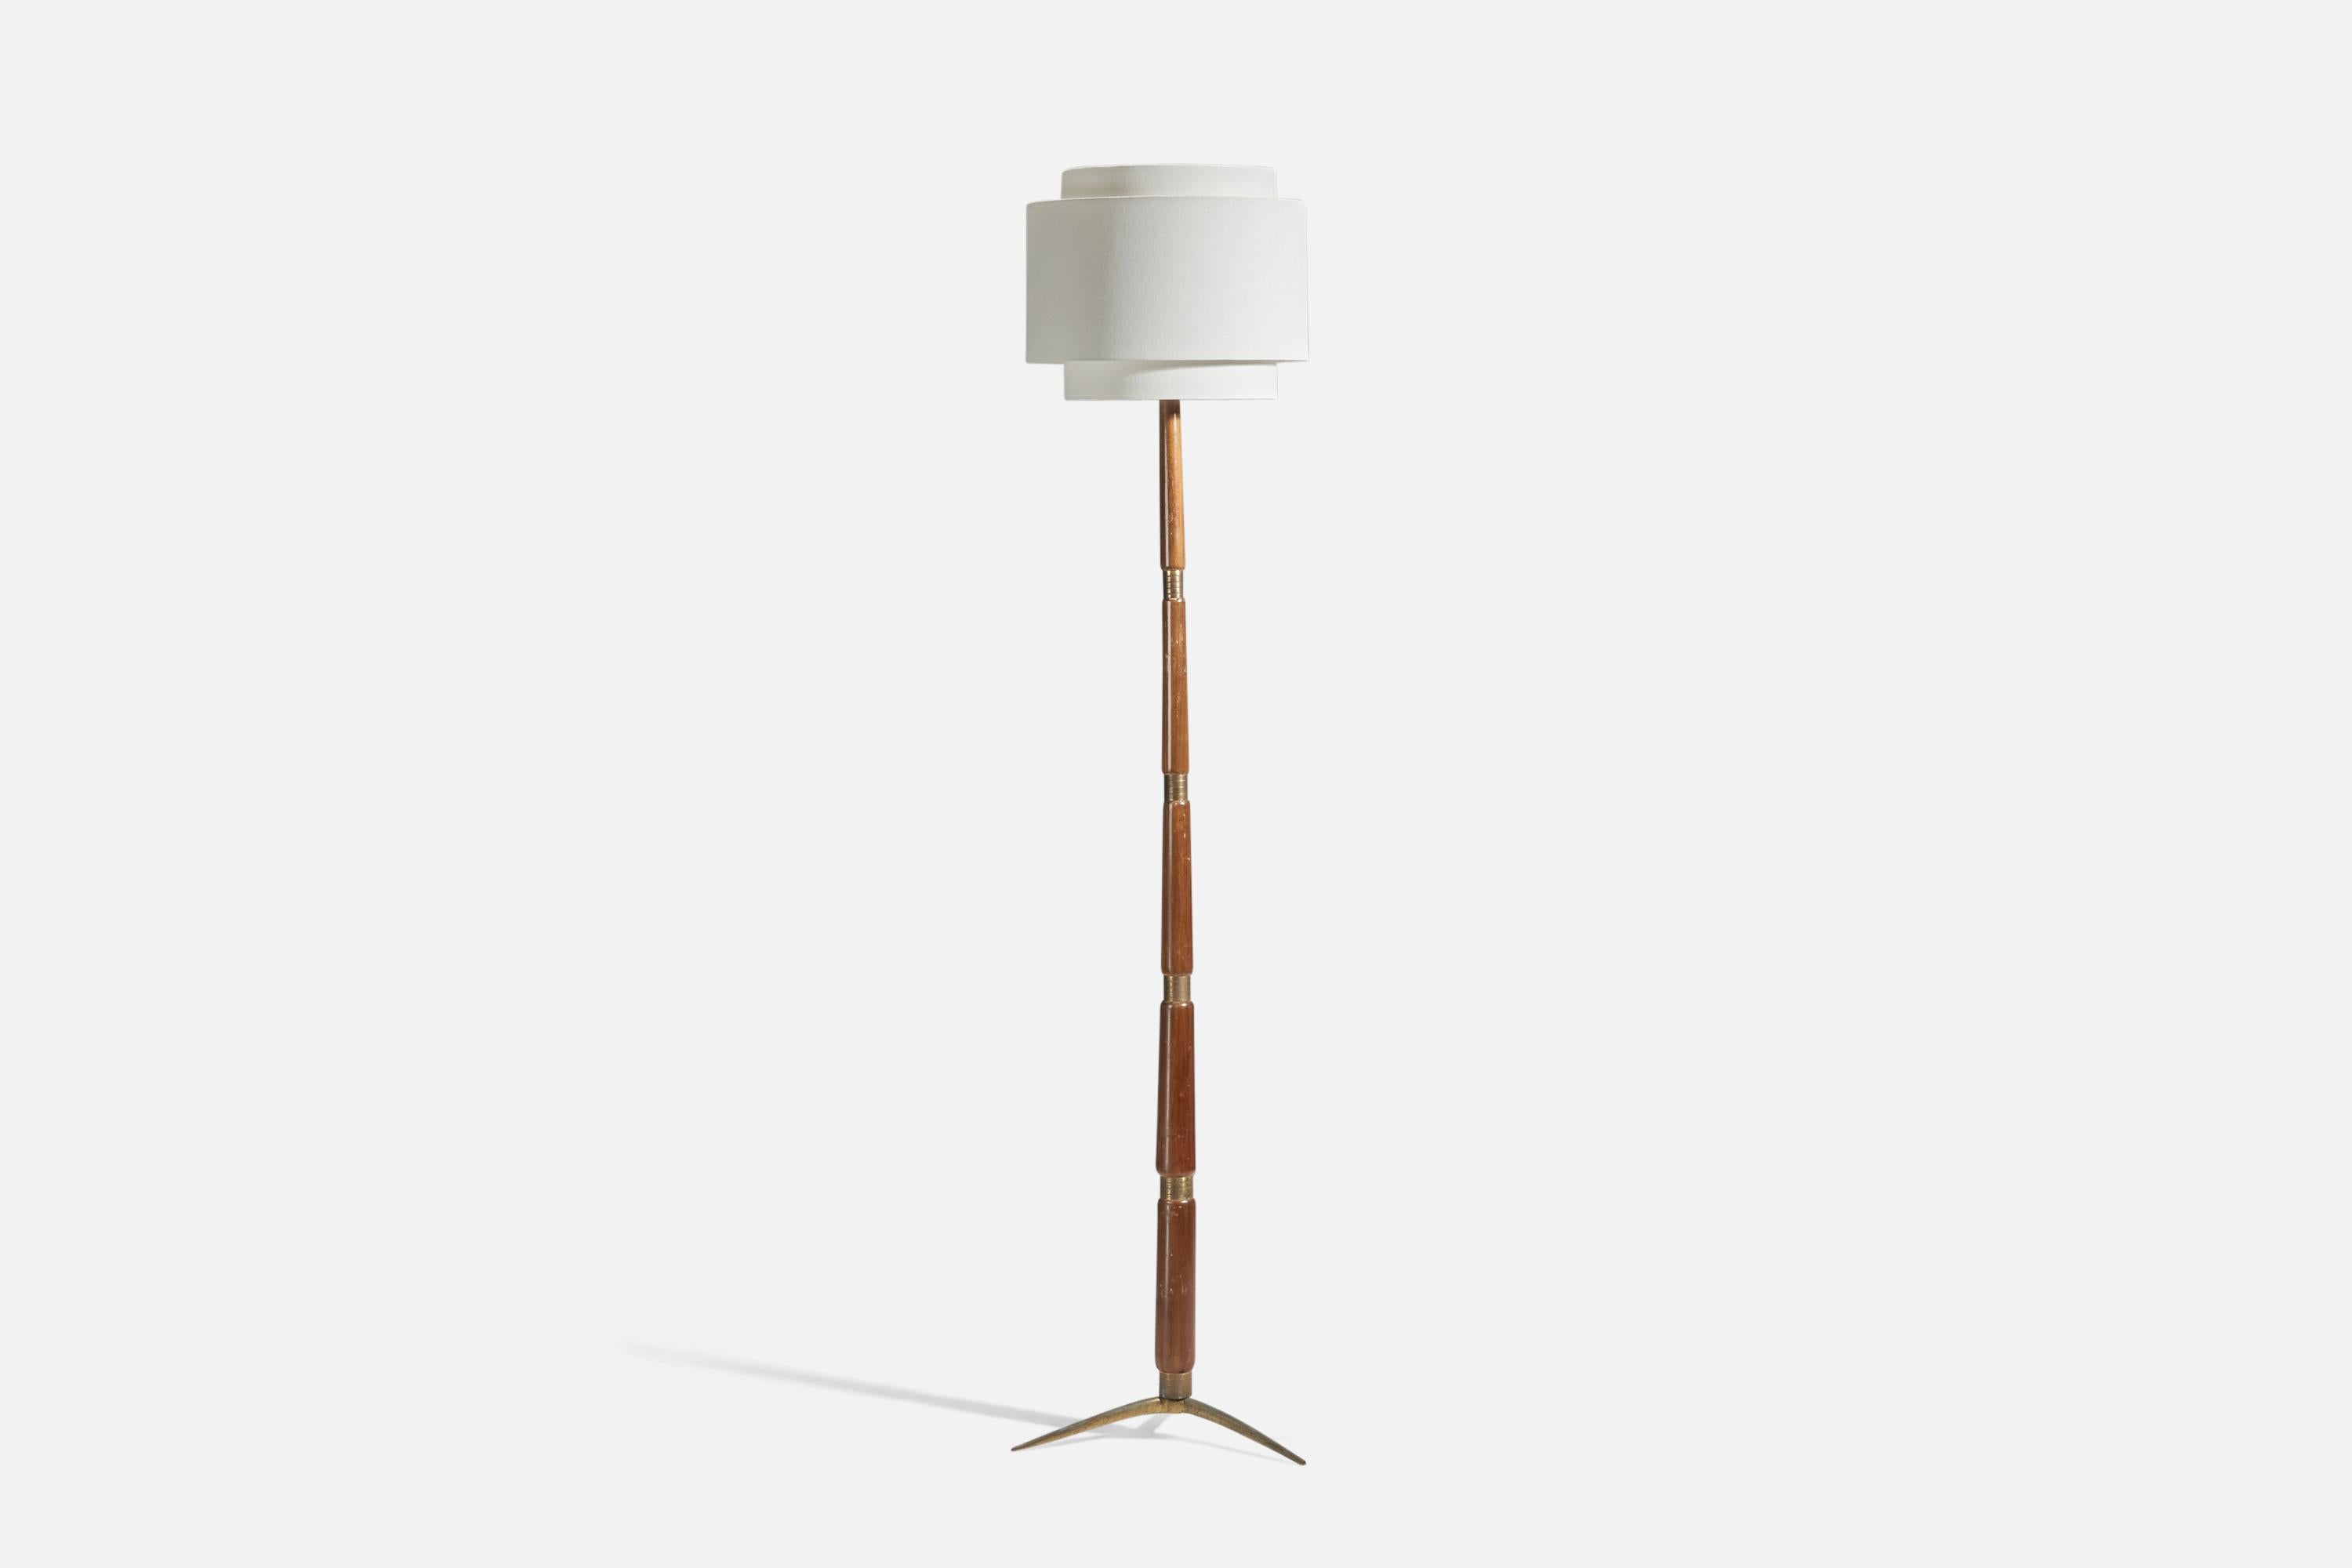 A brass, wood and fabric floor lamp designed and produced in Italy, 1950s.

Sold with Lampshade. Dimensions stated are of Floor Lamp with Lampshade.

Socket takes standard E-26 medium base bulb.

There is no maximum wattage stated on the fixture.
